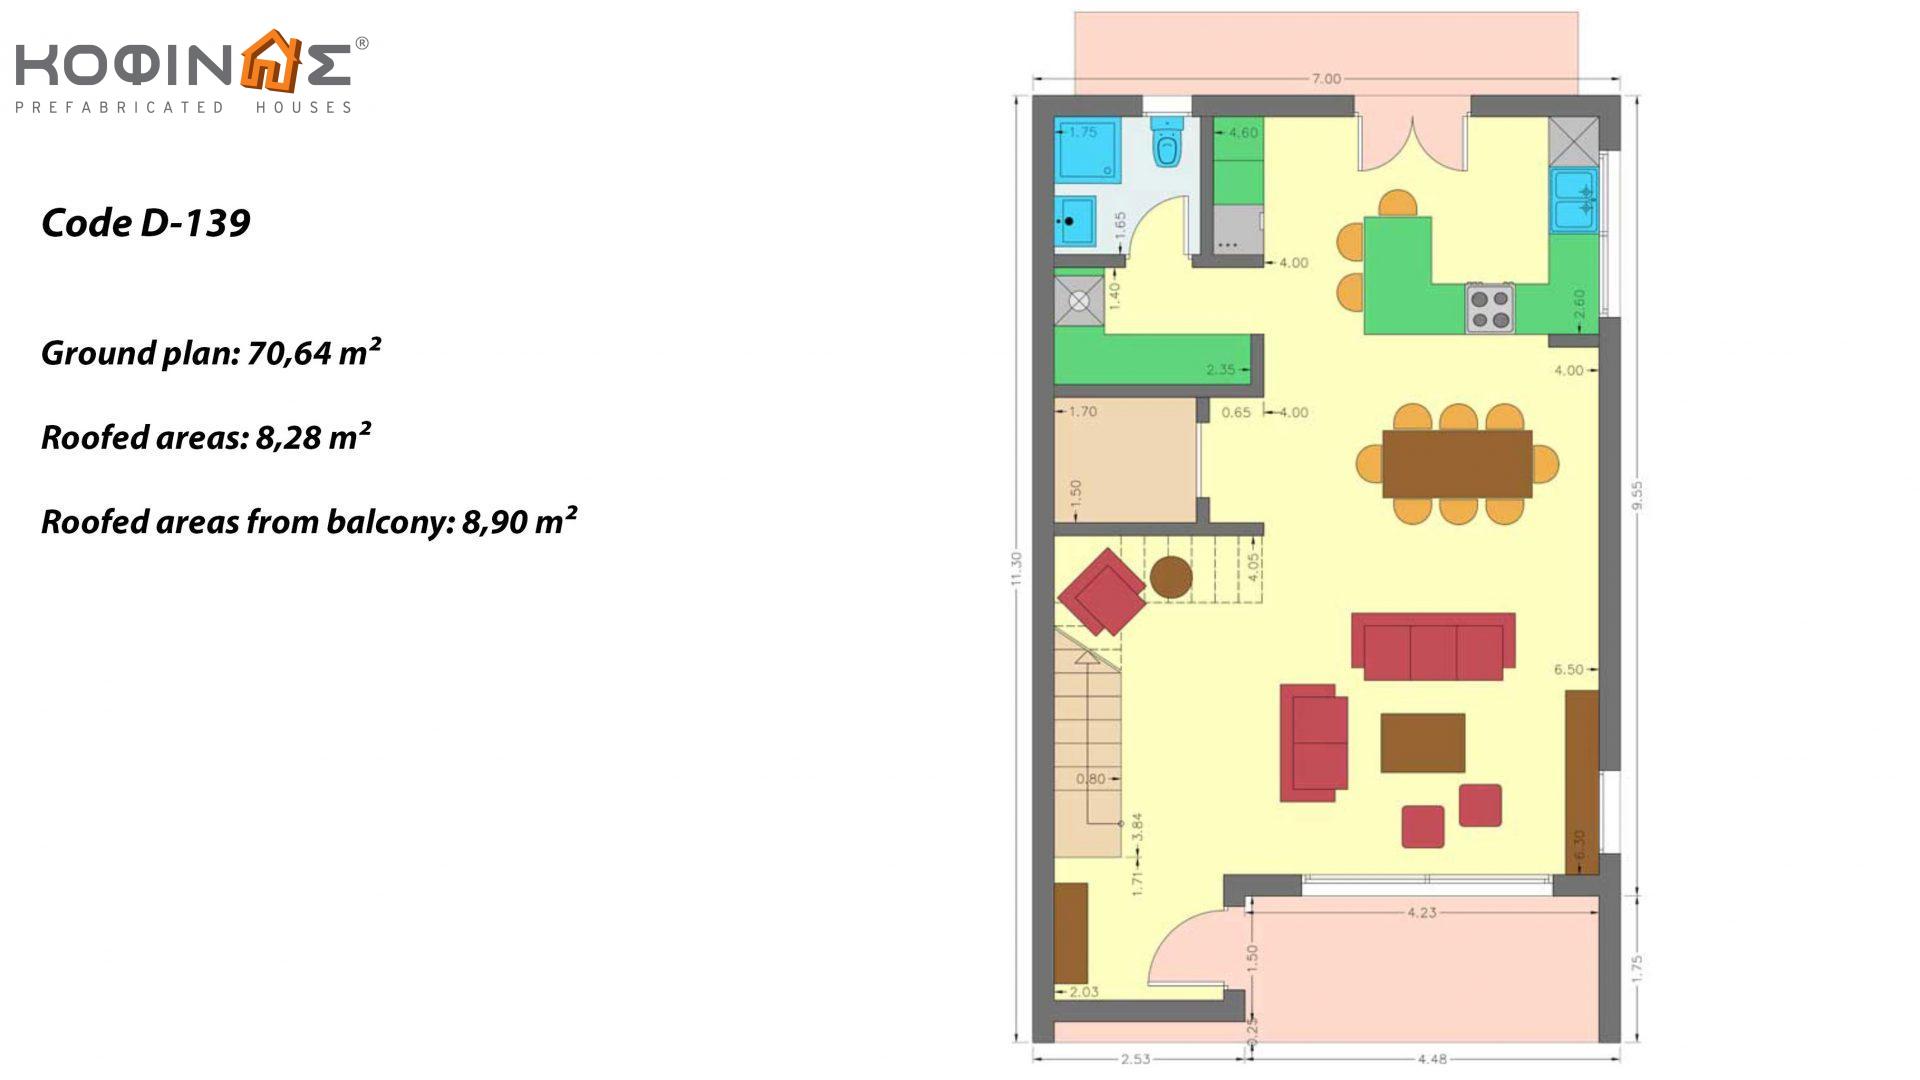 2-story house D-139, total surface of 139,00 m² ,covered roofed areas19.88 m²,balconies 14.27 m²